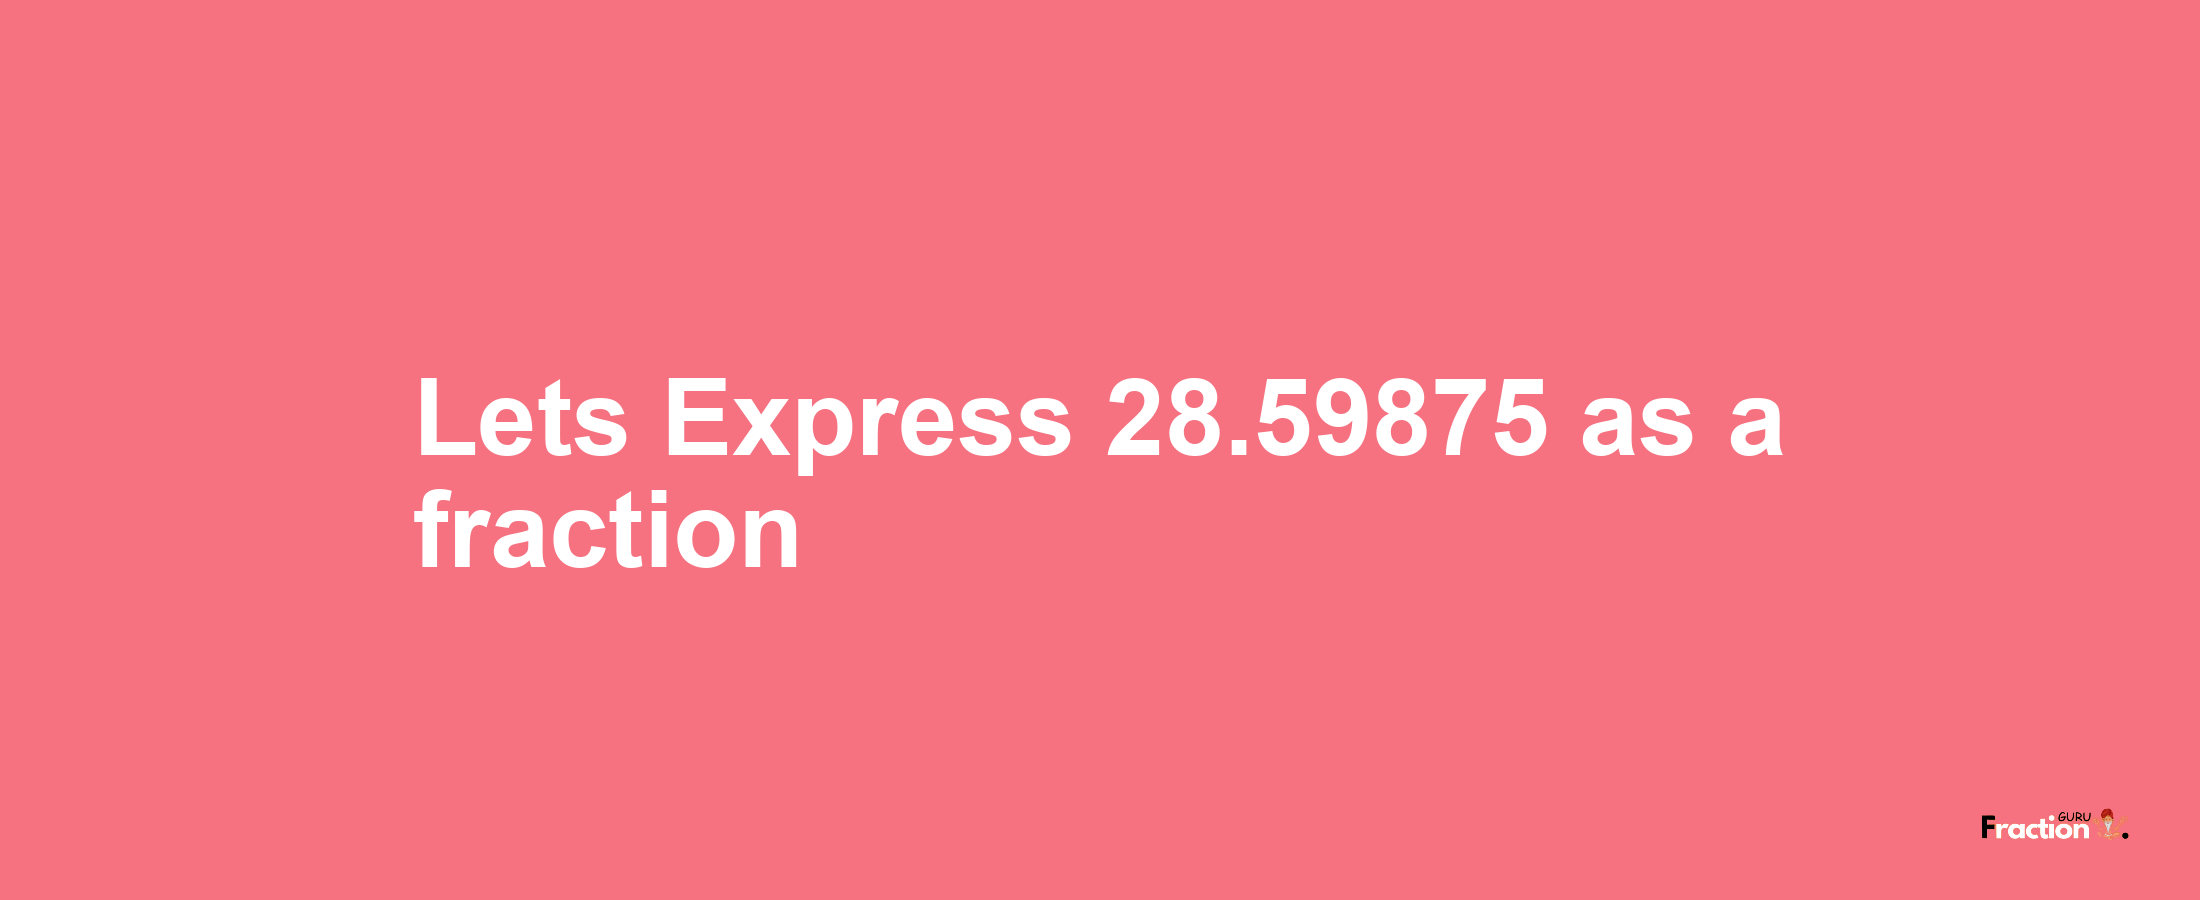 Lets Express 28.59875 as afraction